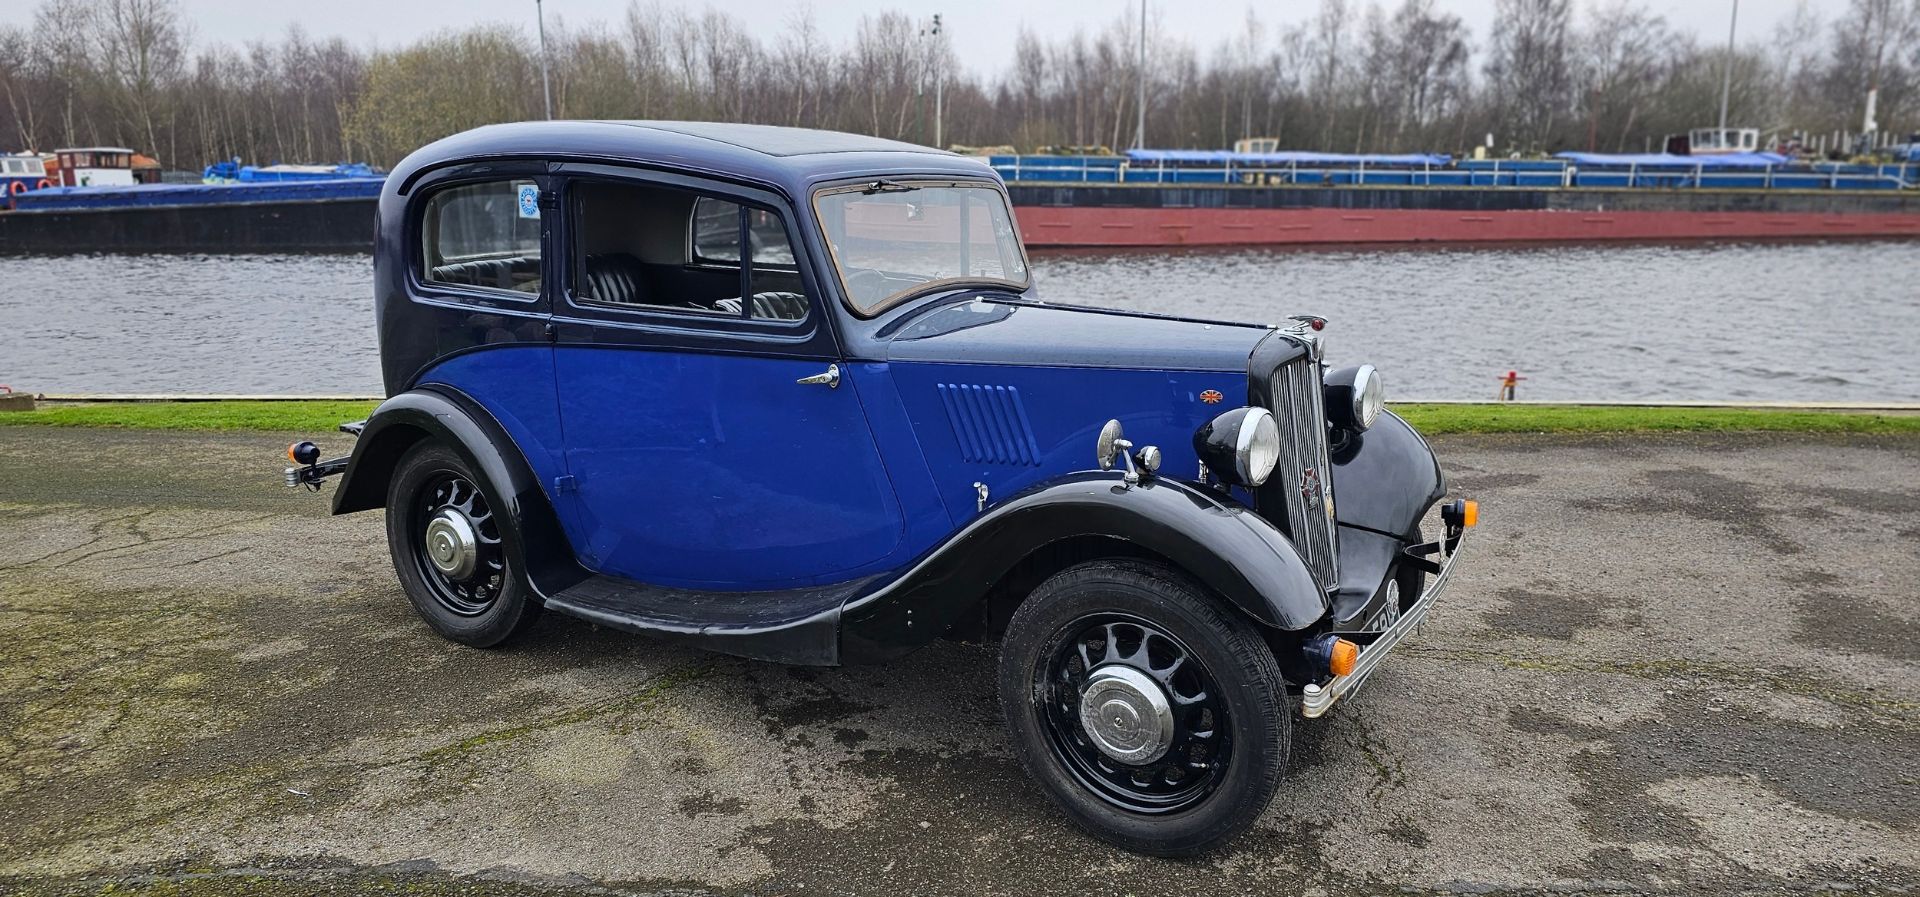 1938 Morris 8, Series II, 817cc. Registration number EAR 581. Chassis number S 2/E 166284. Engine